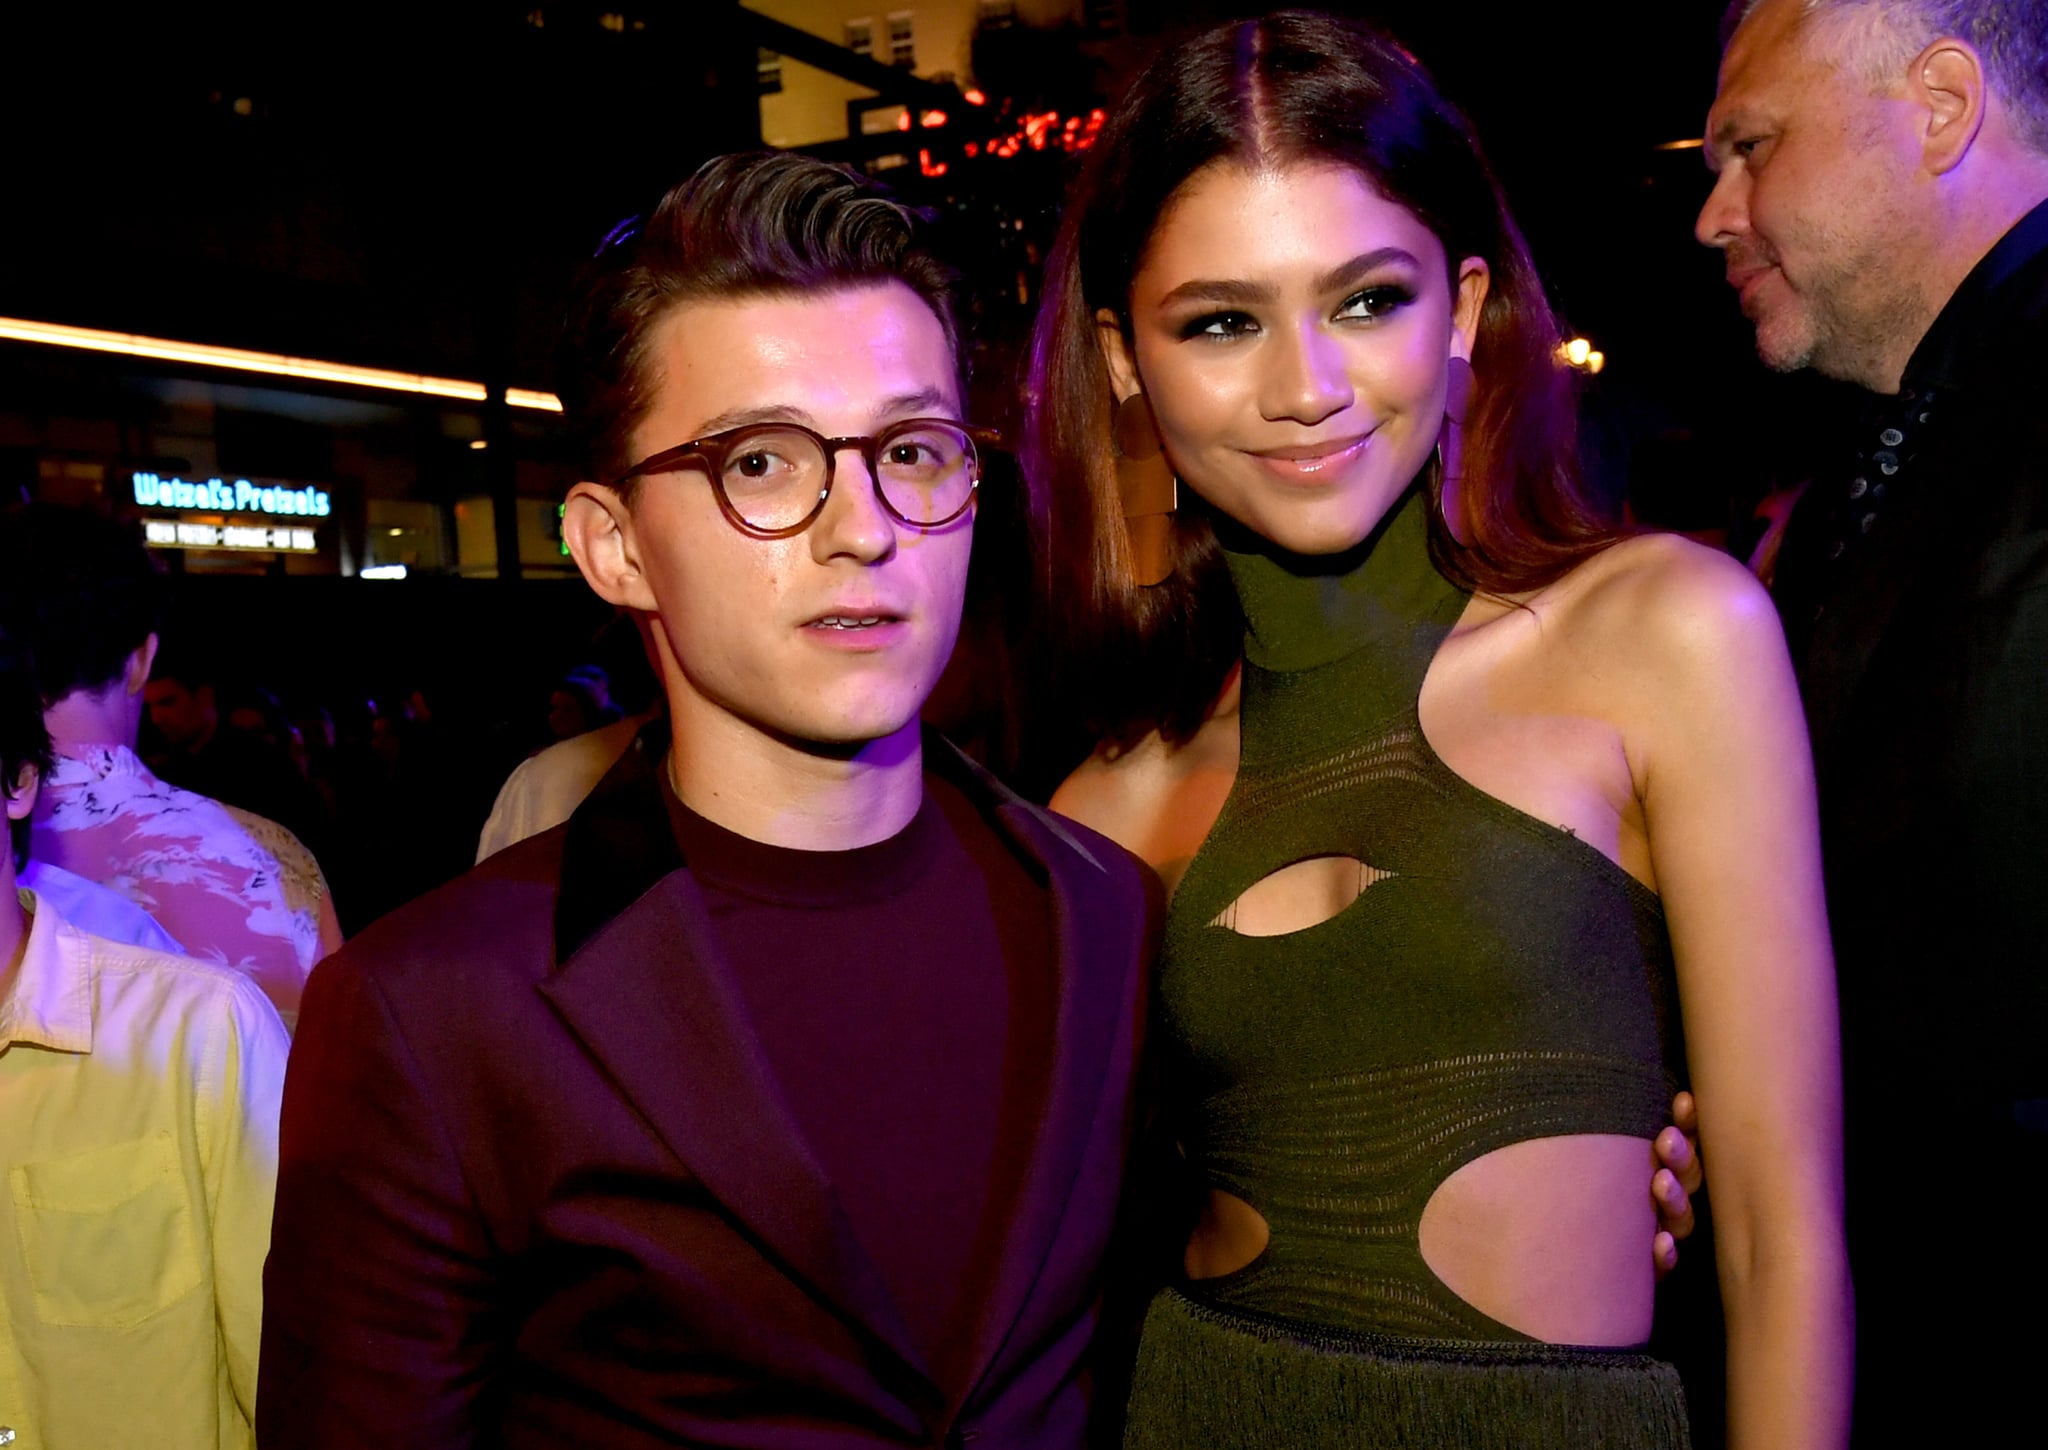 HOLLYWOOD, CALIFORNIA - JUNE 26: Tom Holland (L) and Zendays pose at the after party for the premiere of Sony Pictures' 